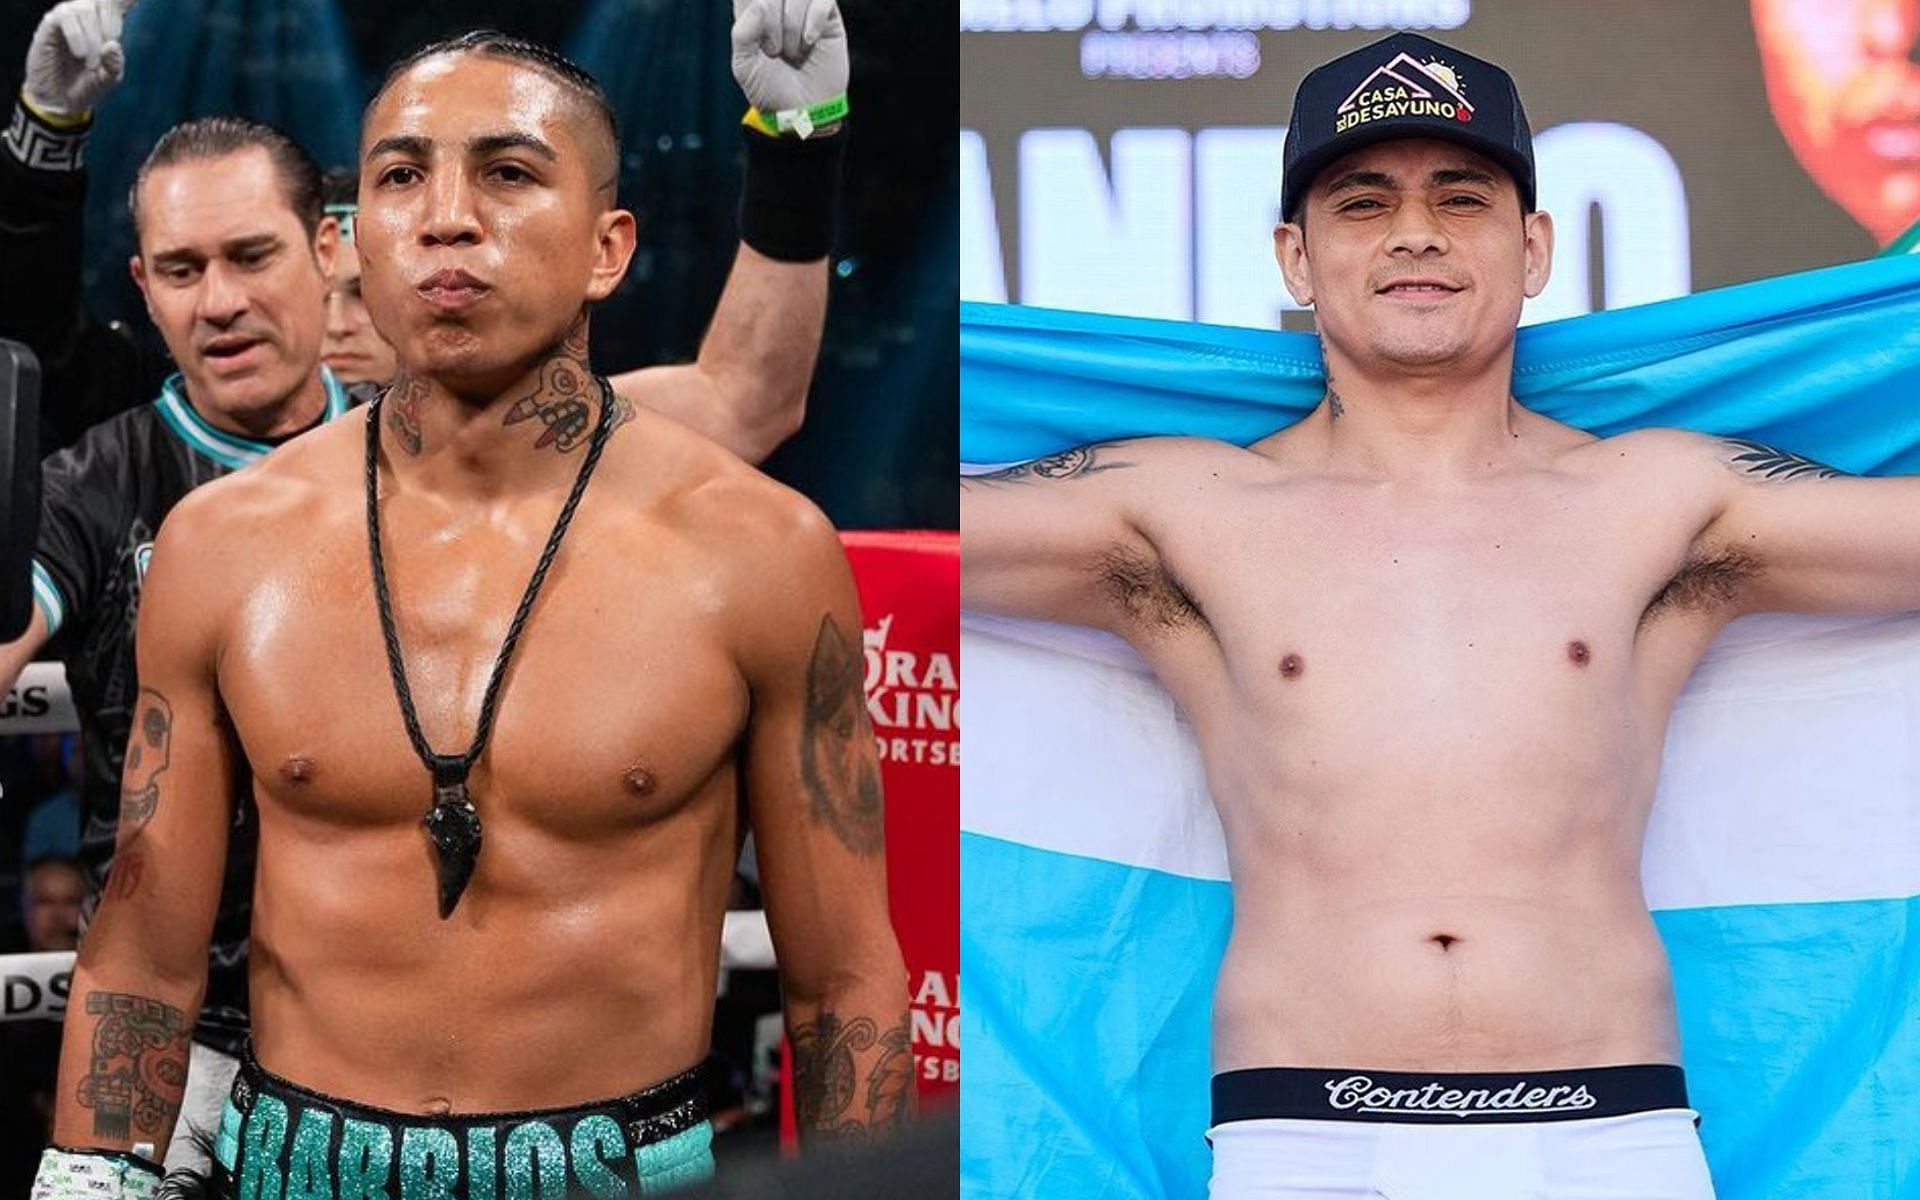 Mario Barrios (left) puts his WBC interim welterweight title on the line against Fabian Maidana (right) [Images courtesy of @boxer_barrior and @tntmaidana on Instagram]